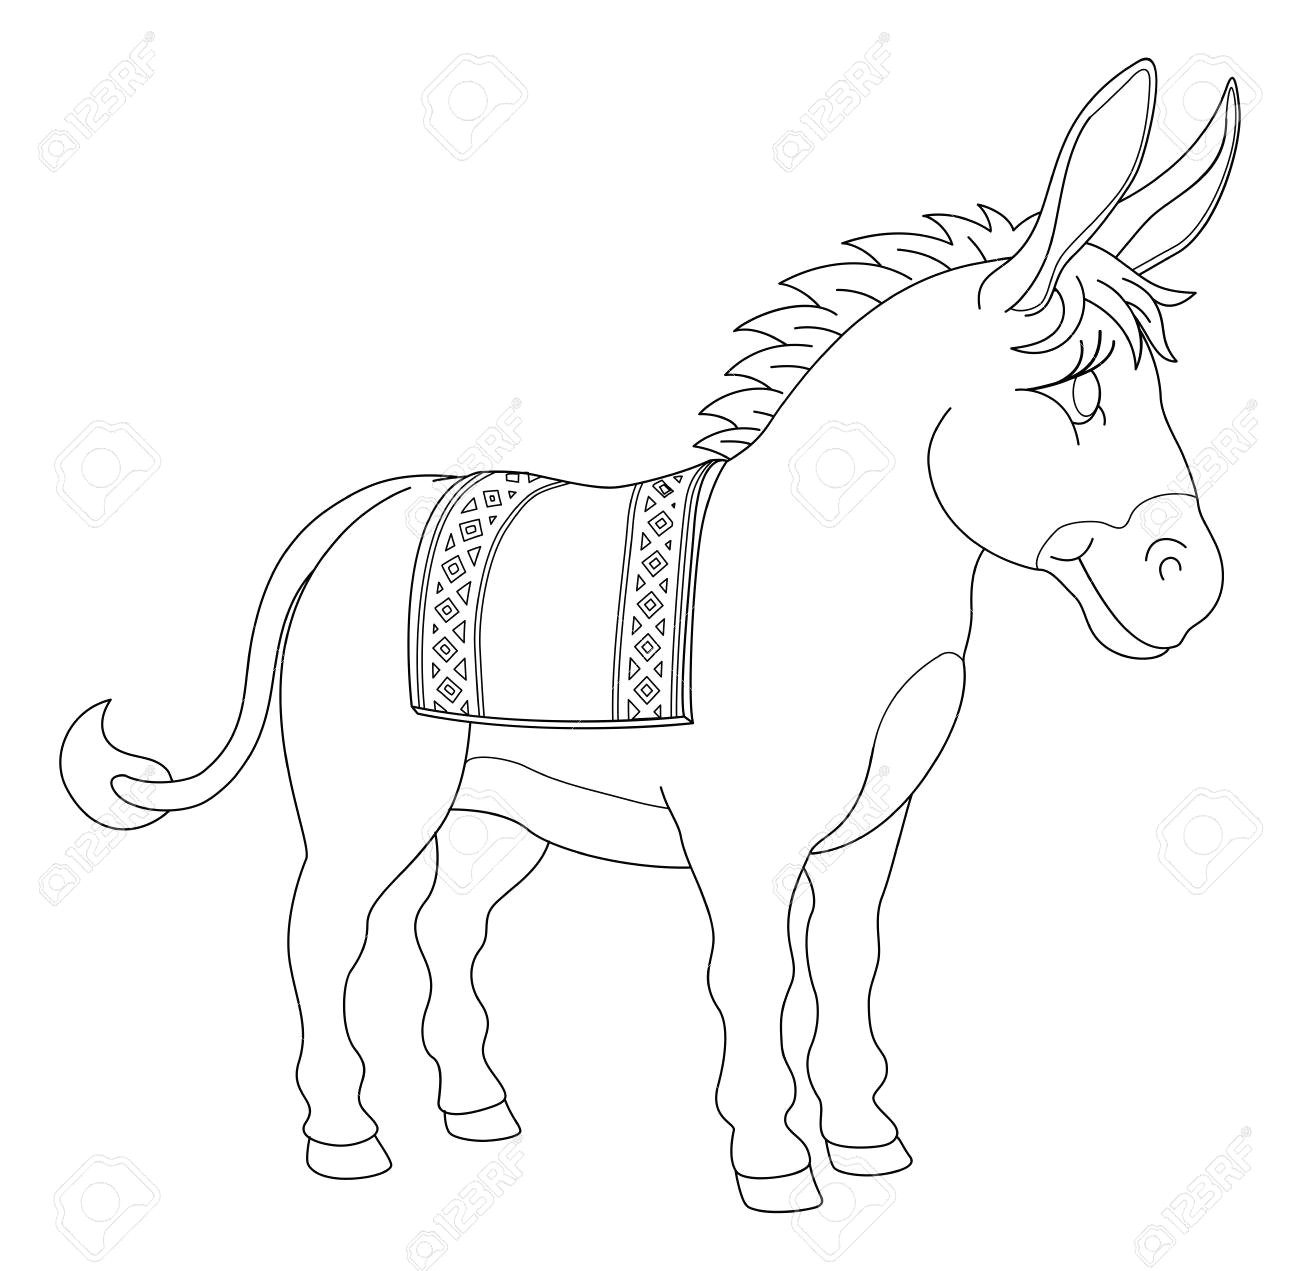 a donkey animal cute cartoon character black and white coloring illustration stock vector 112752801